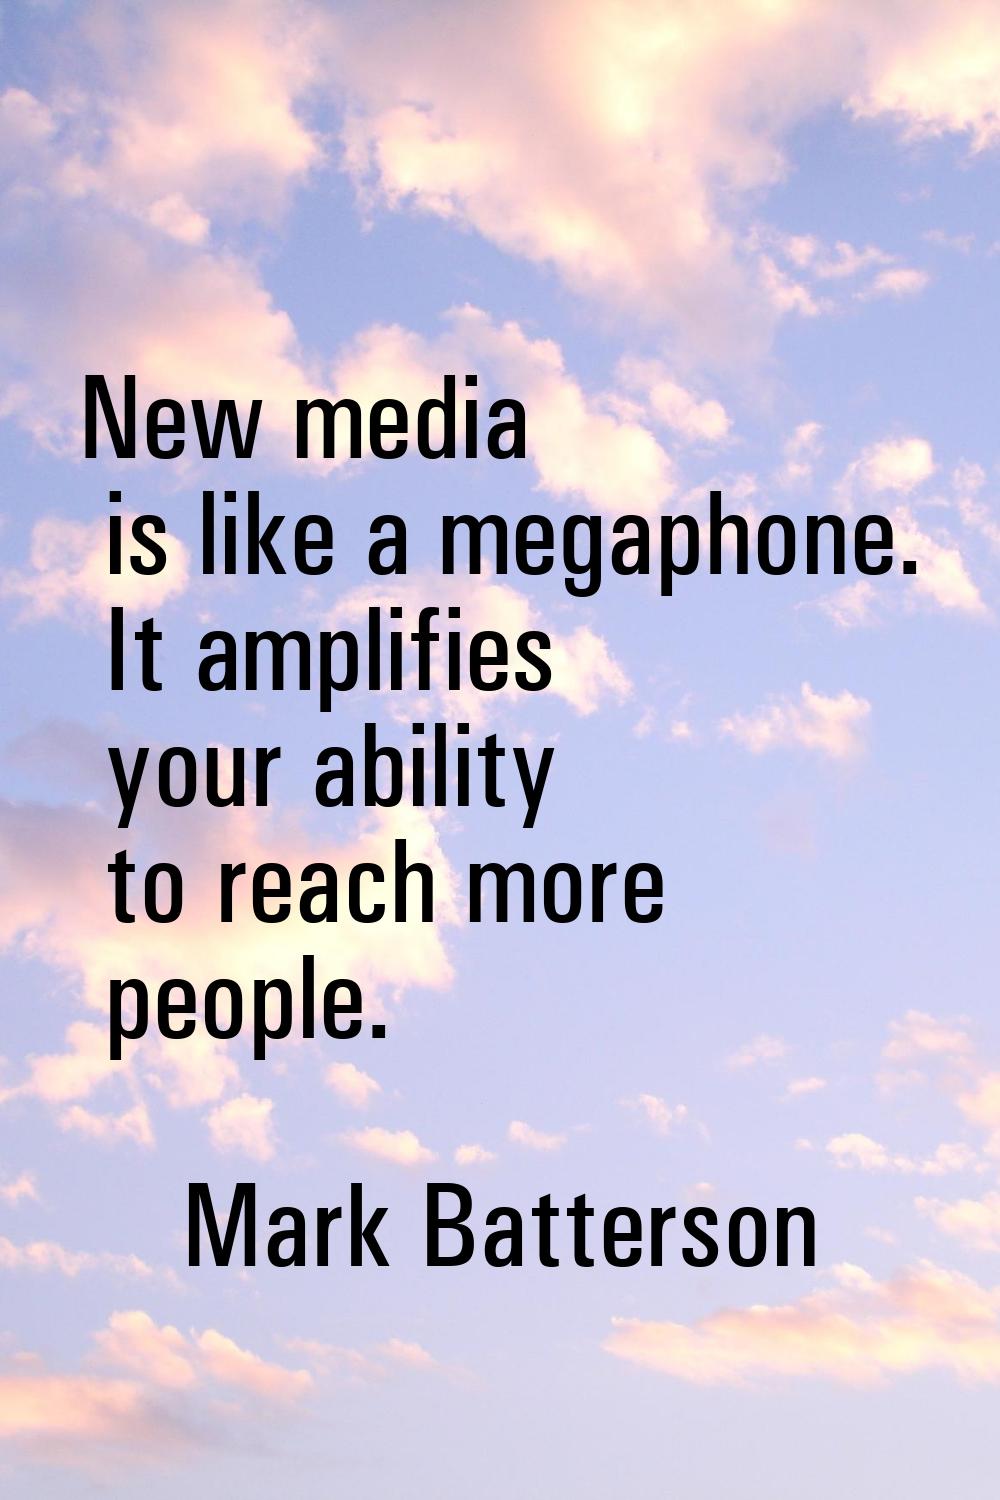 New media is like a megaphone. It amplifies your ability to reach more people.